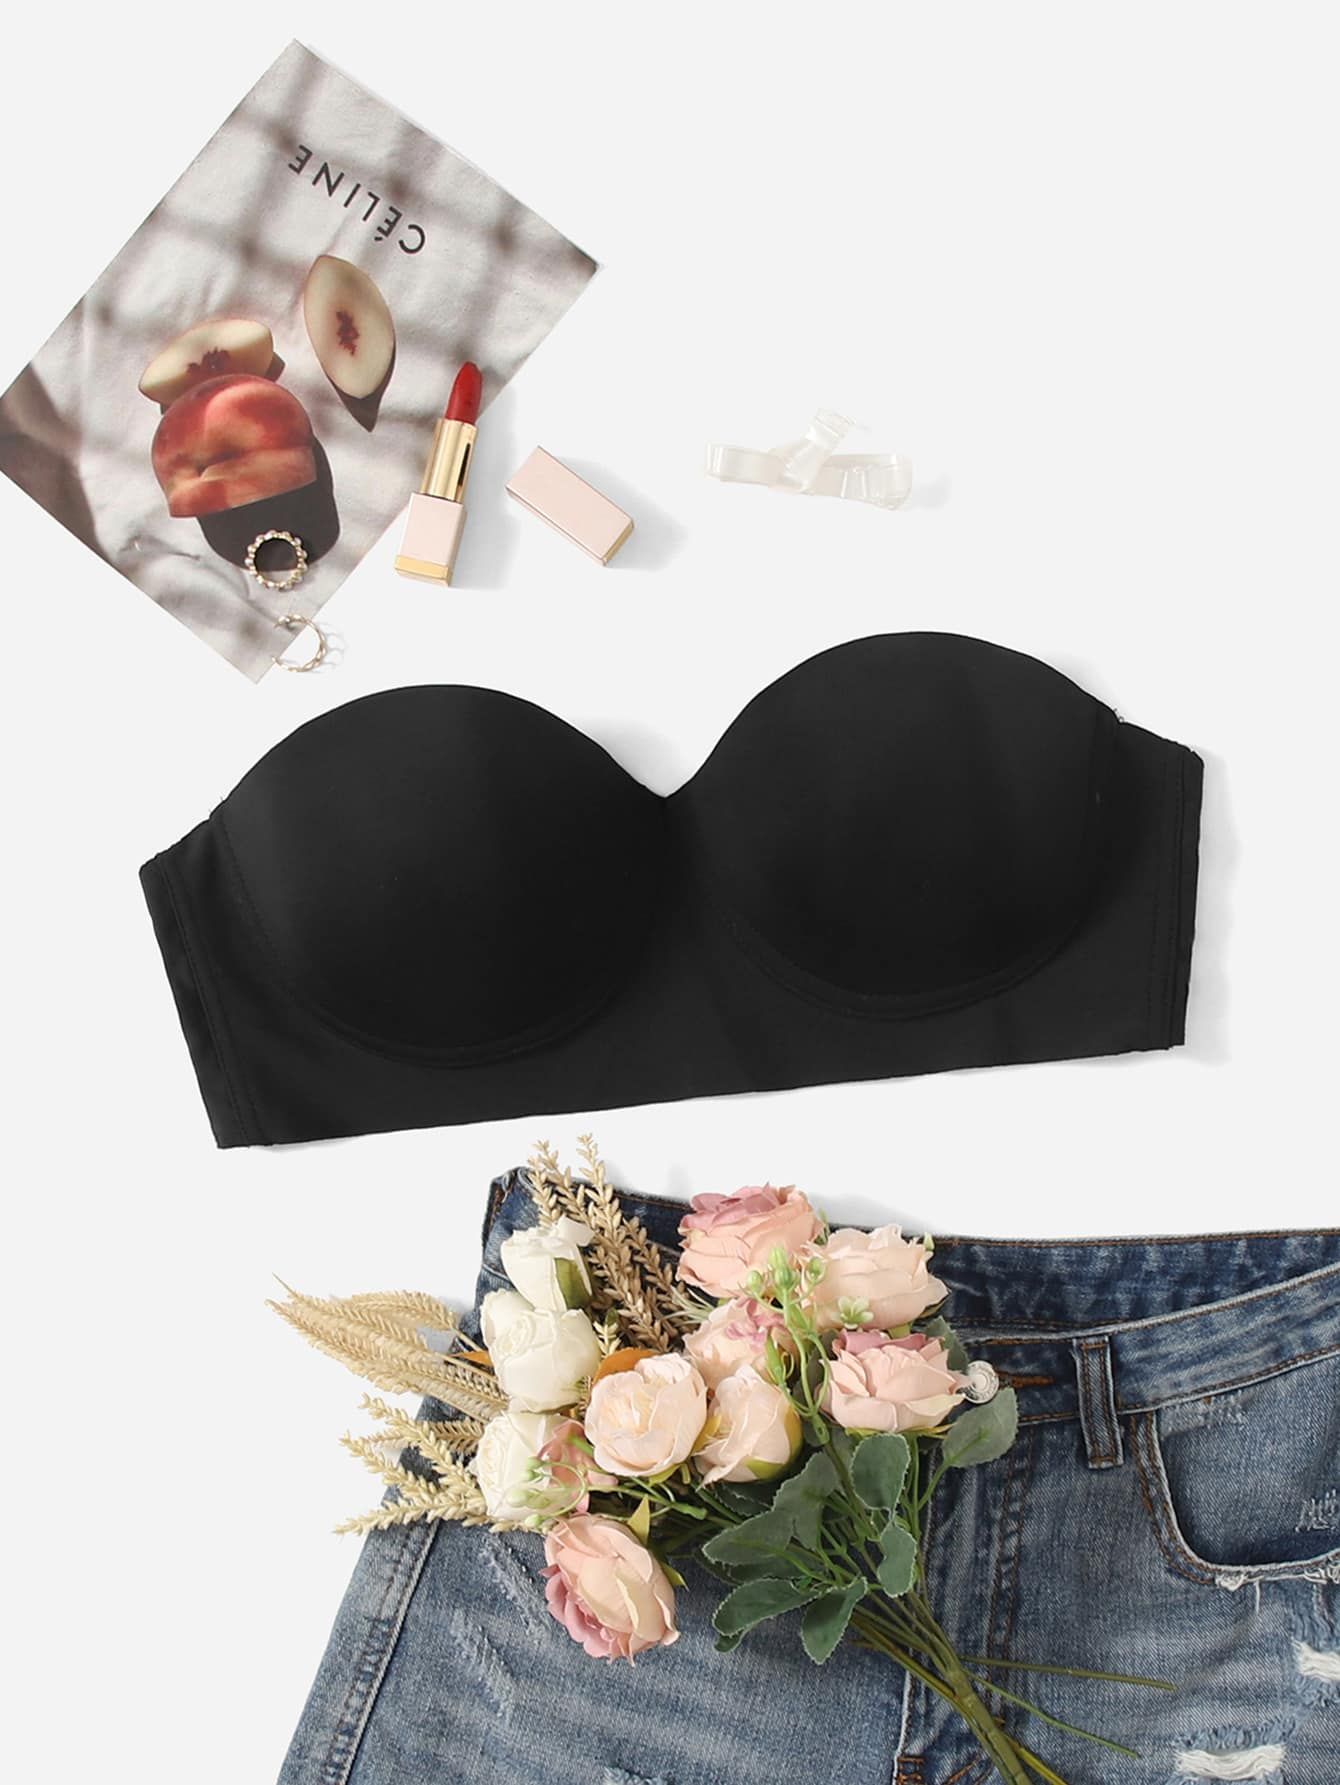 Feel Confident and Sexy in a Stylish Tube
Bra: Chic and Supportive Lingerie